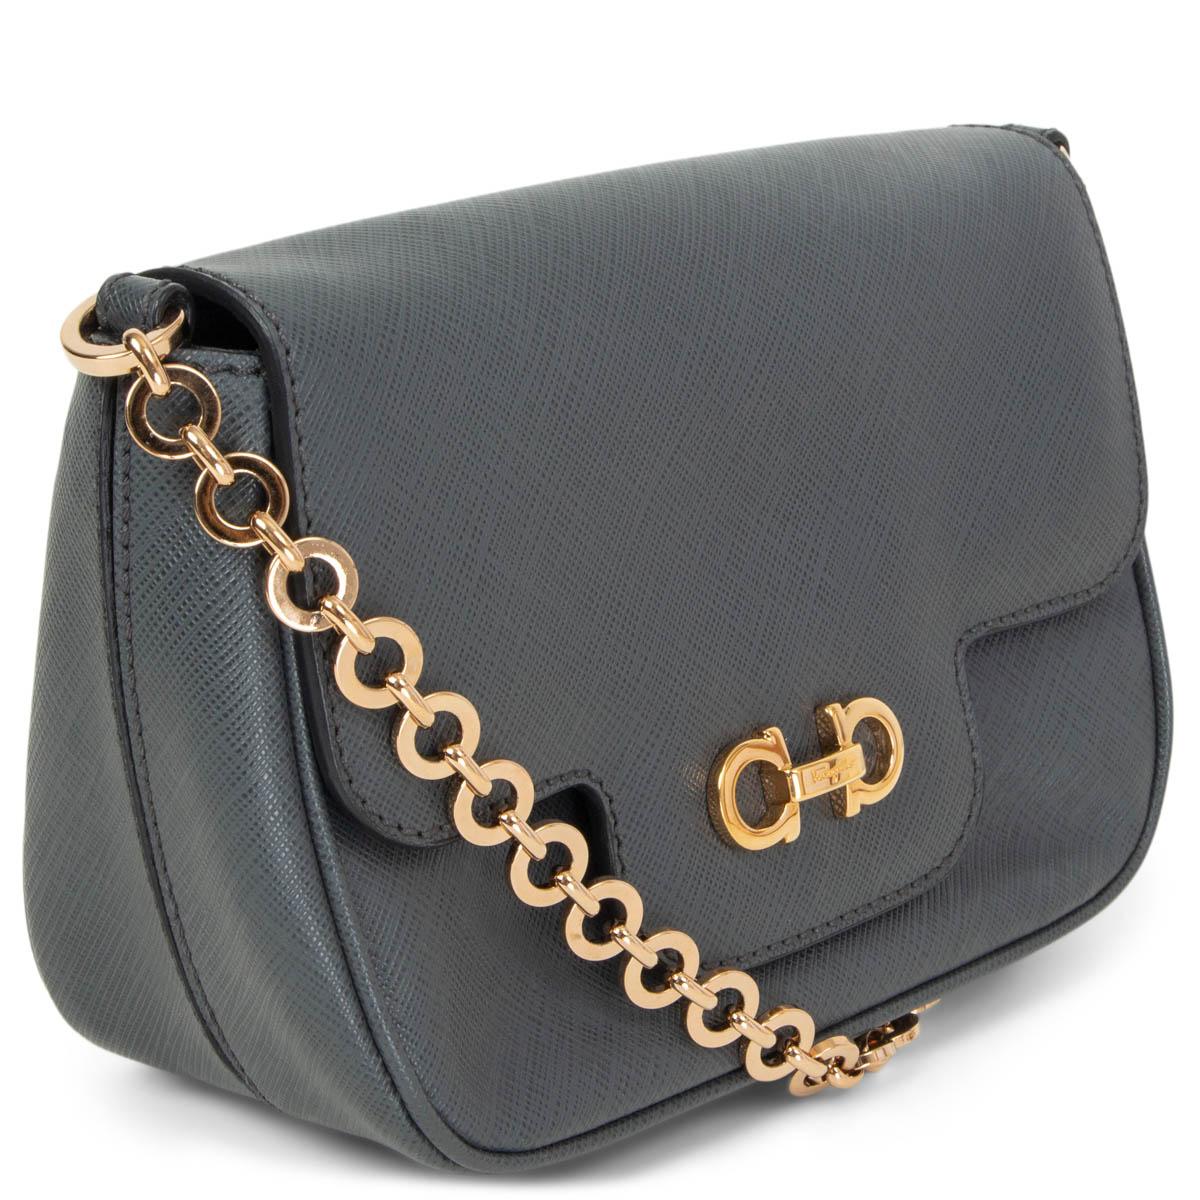 100% authentic Salvatore Ferragamo Luciana mini crossbody bag in grey textured leather featuring gold-tone hardware, a chain link shoulder-strap and a flat pocket at the back. Opens with Double Gancini buckle with a magnetic button under the flap